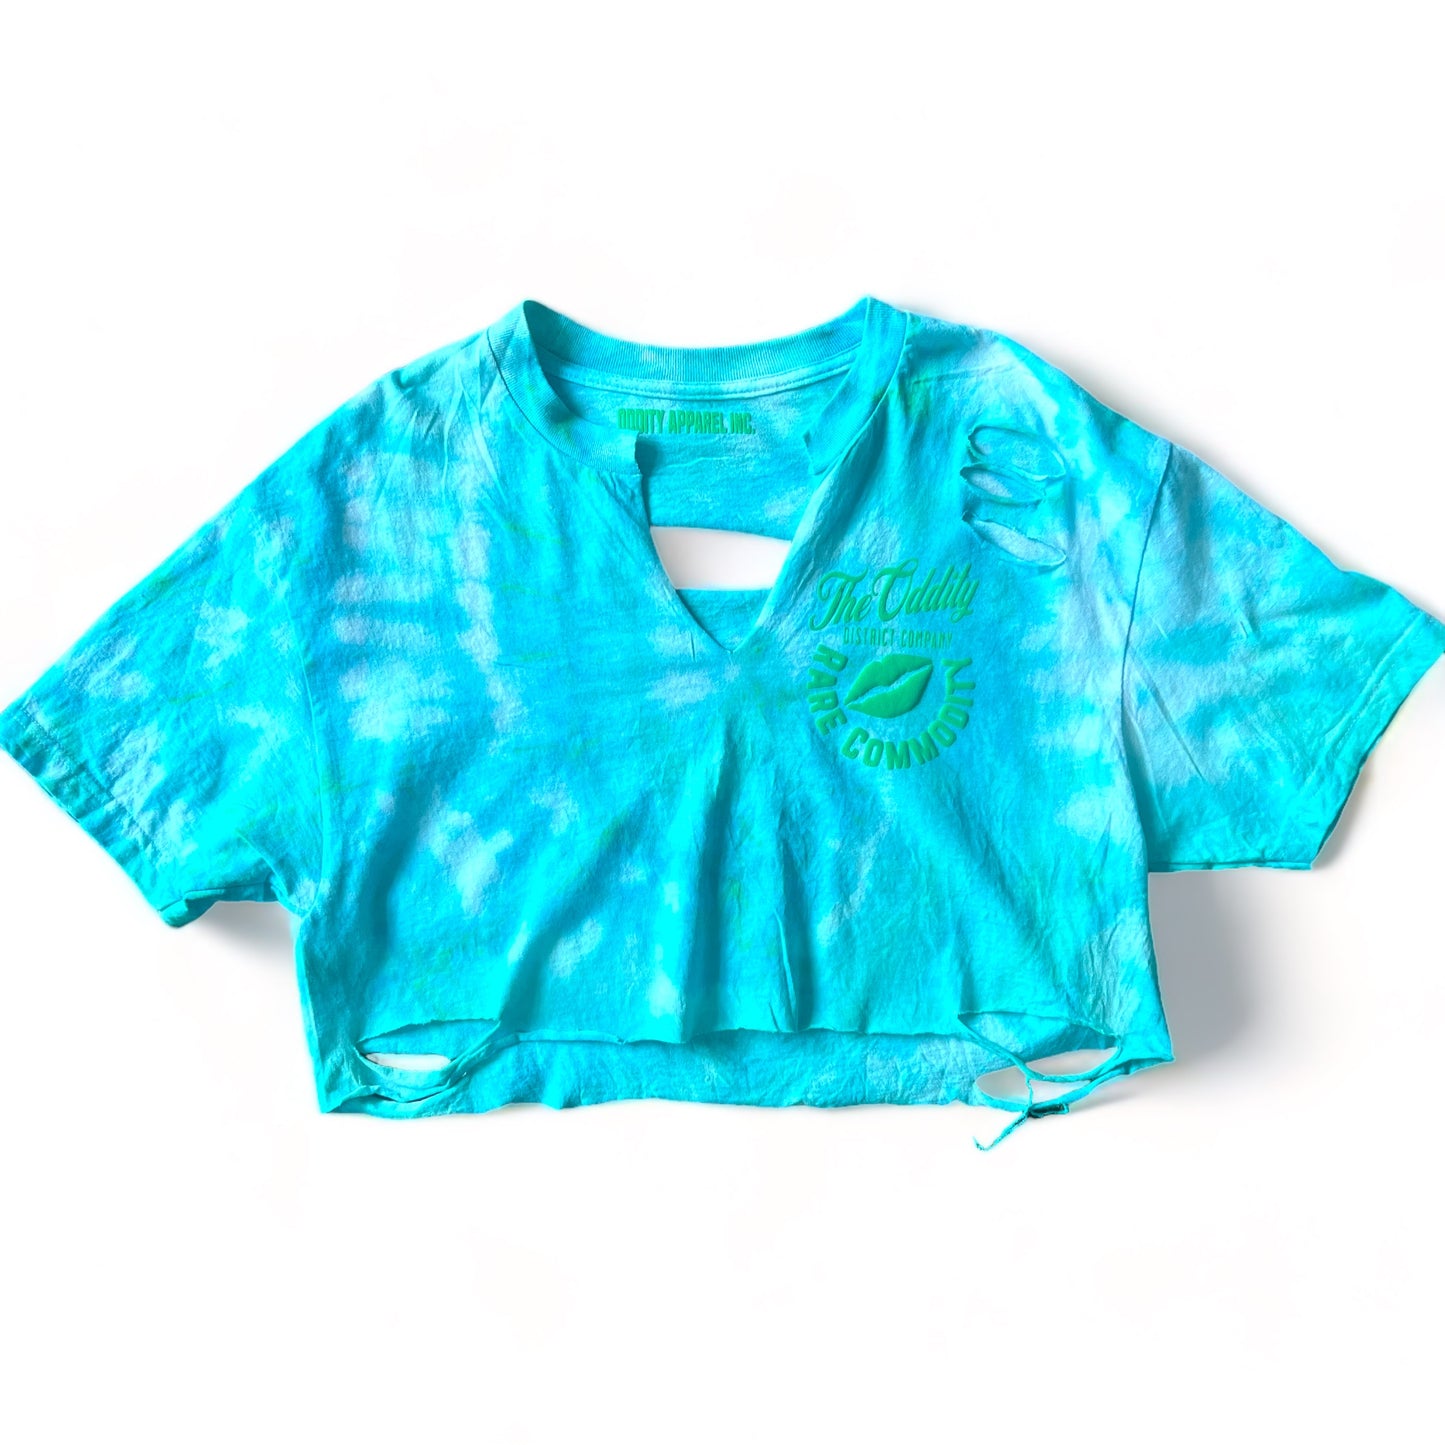 ODCO Crop Top Every Blue/neon green